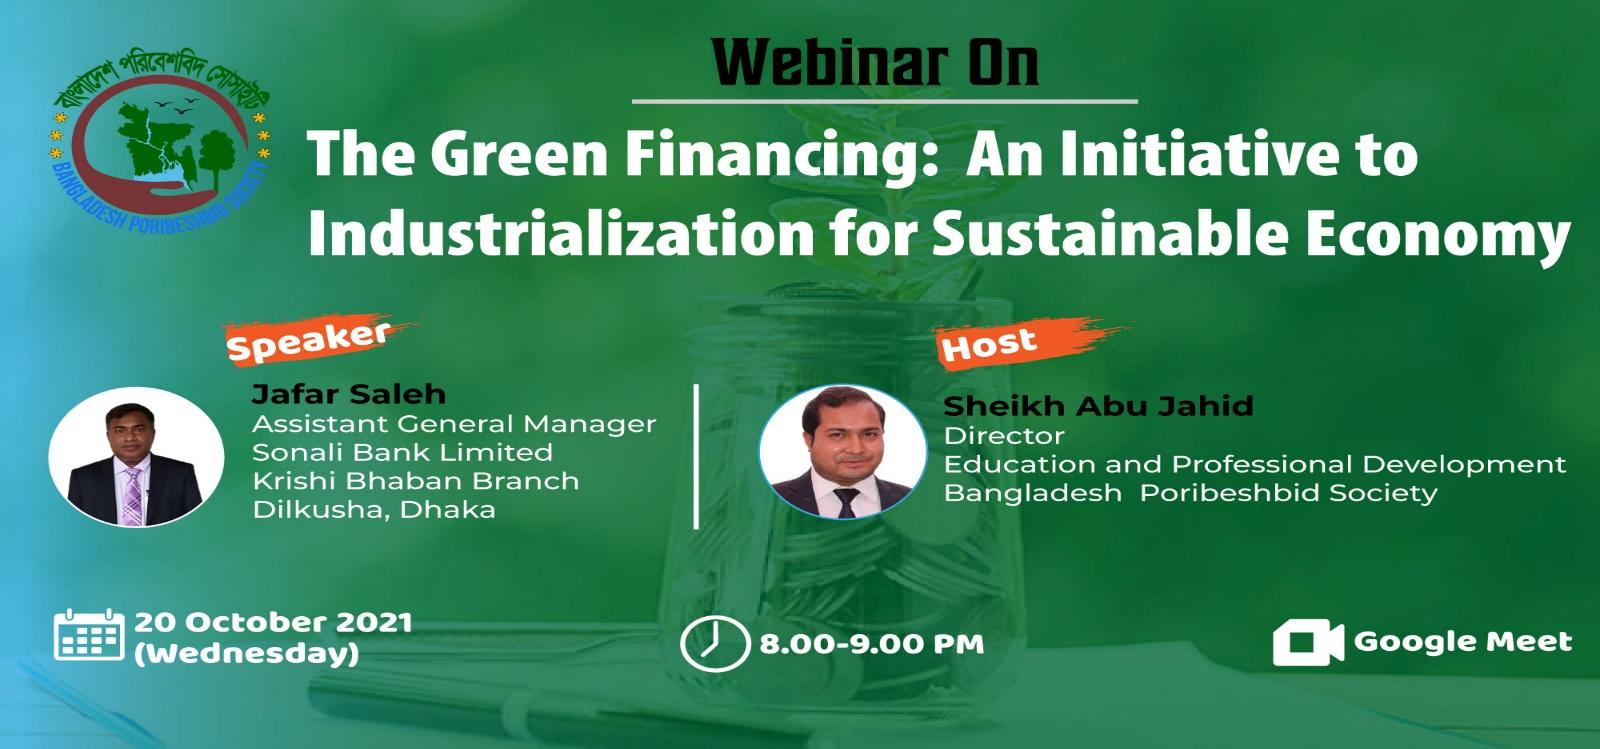 BPS webinars on “The Green Financing: An Initiative to Industrialization for Sustainable Economy”